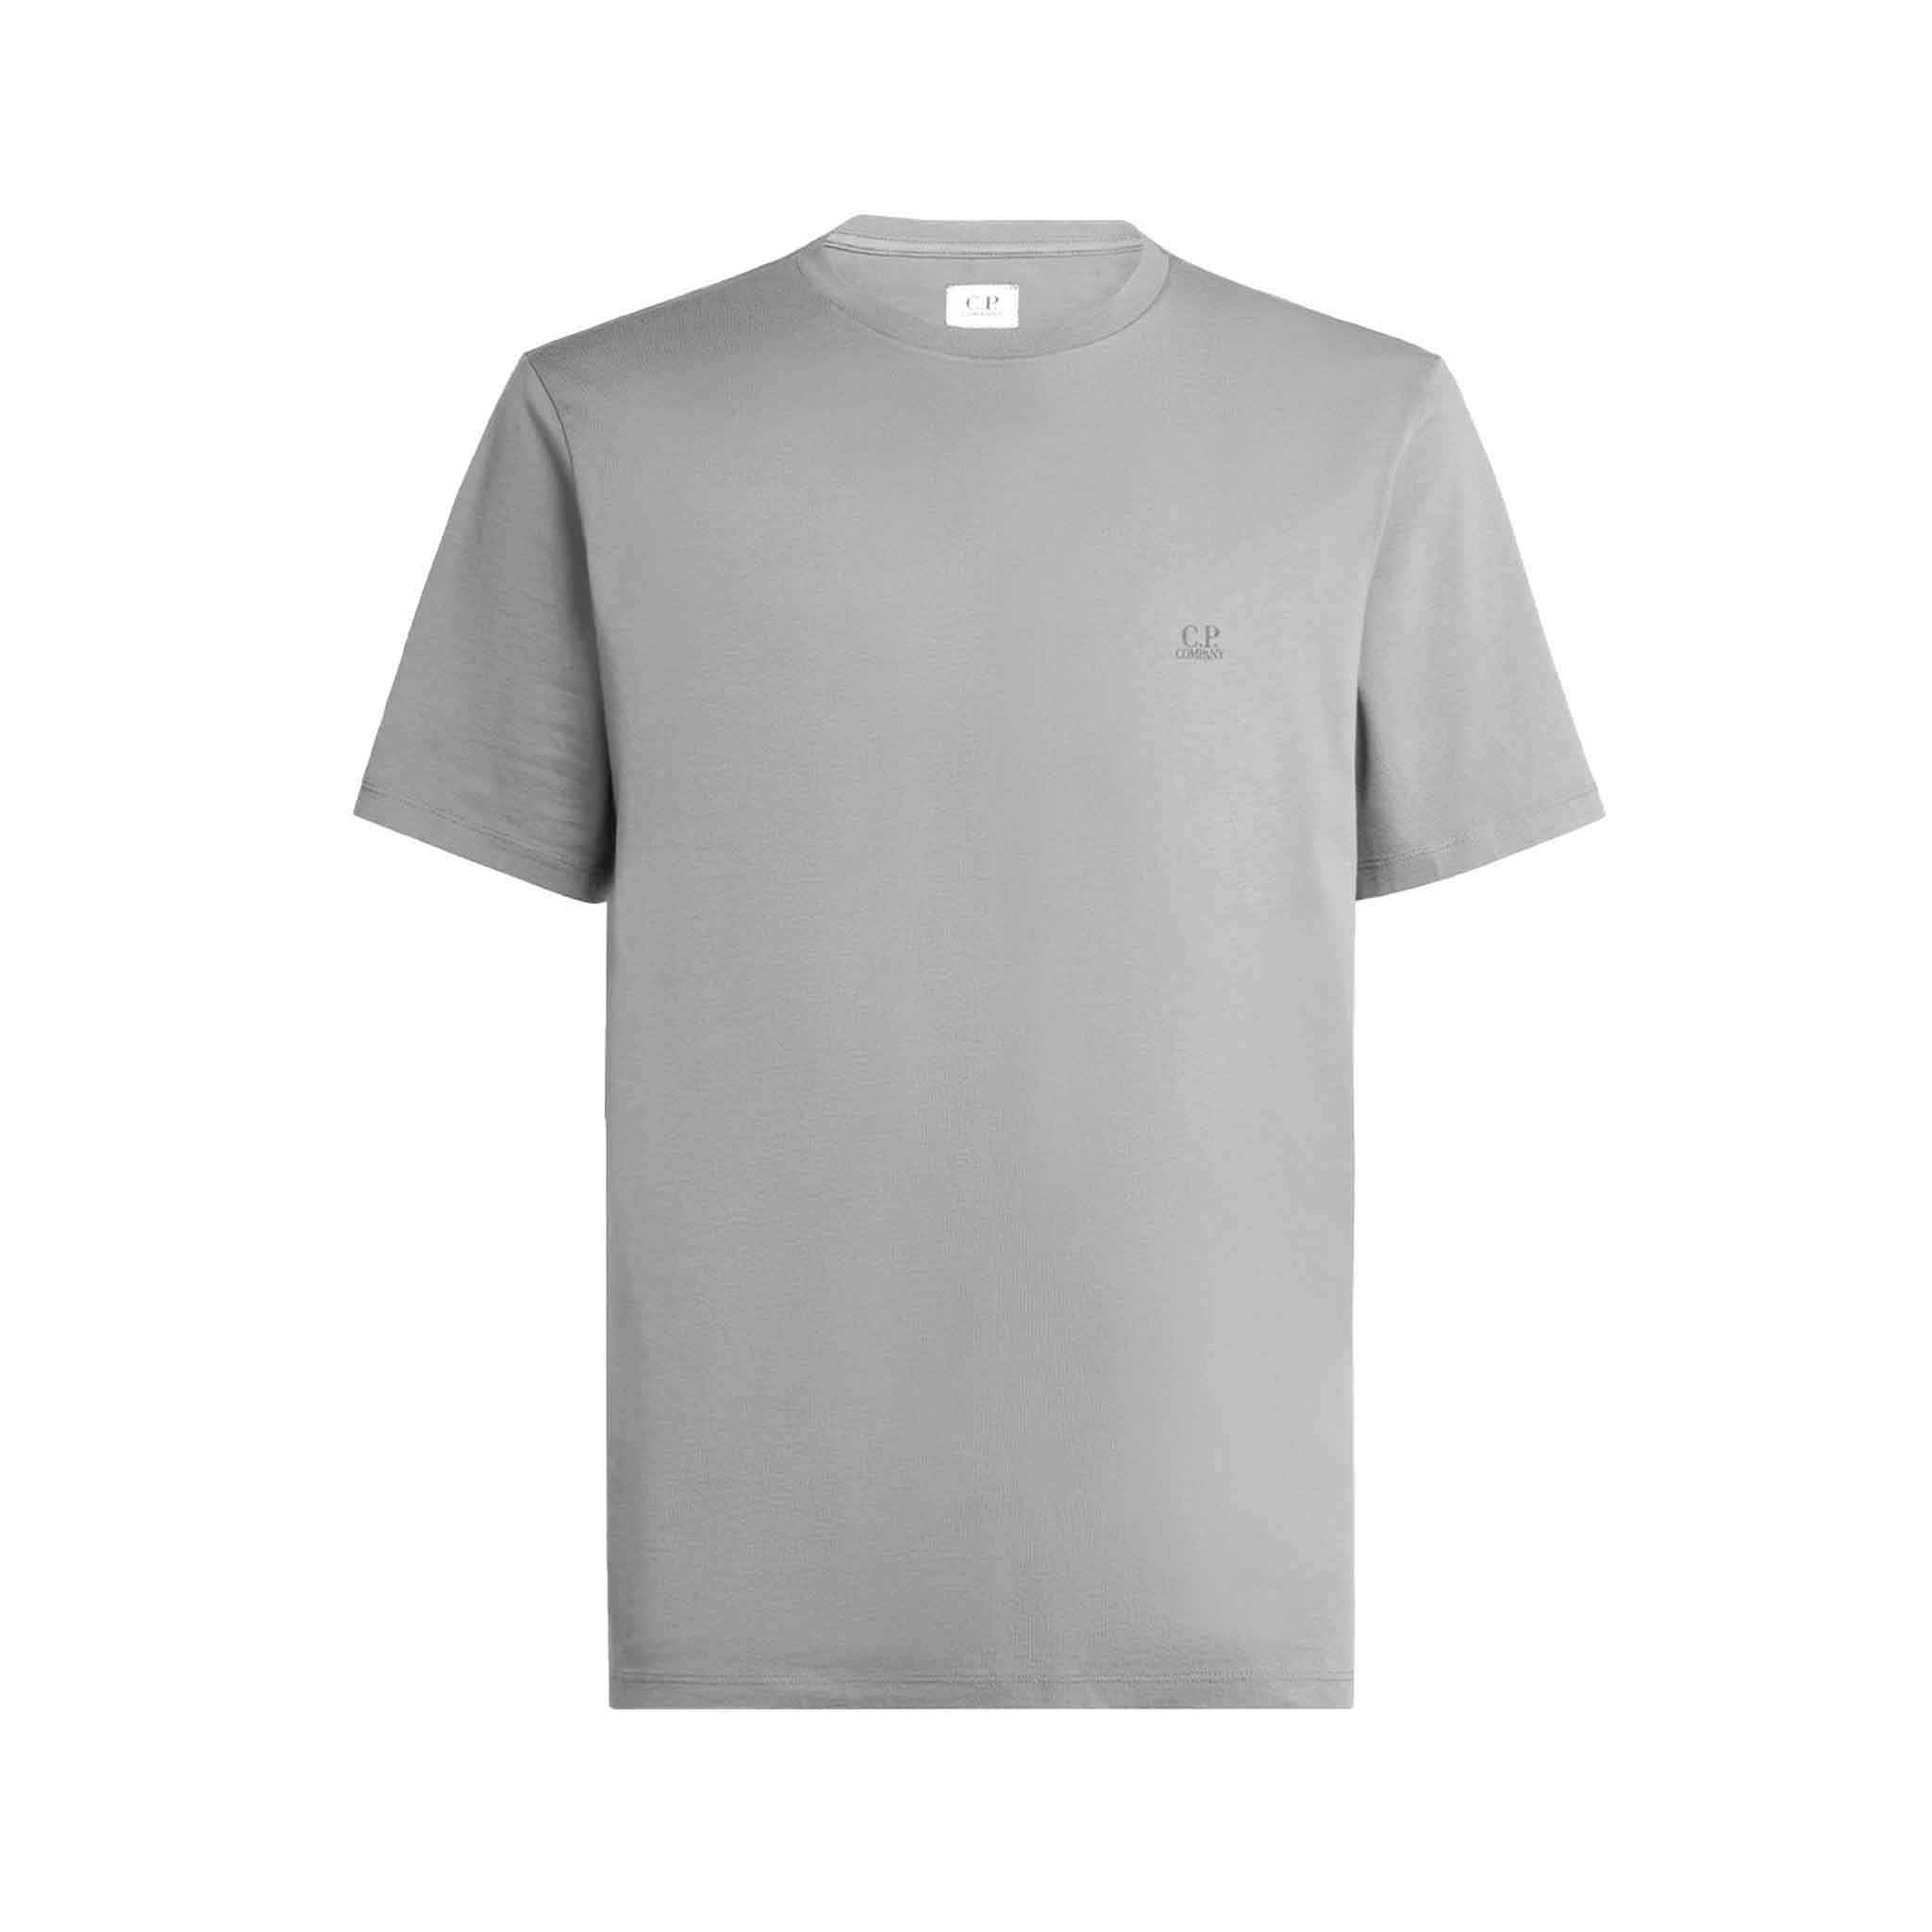 C.P. Company 30/1 Jersey Goggle T-shirt in Drizzle Grey